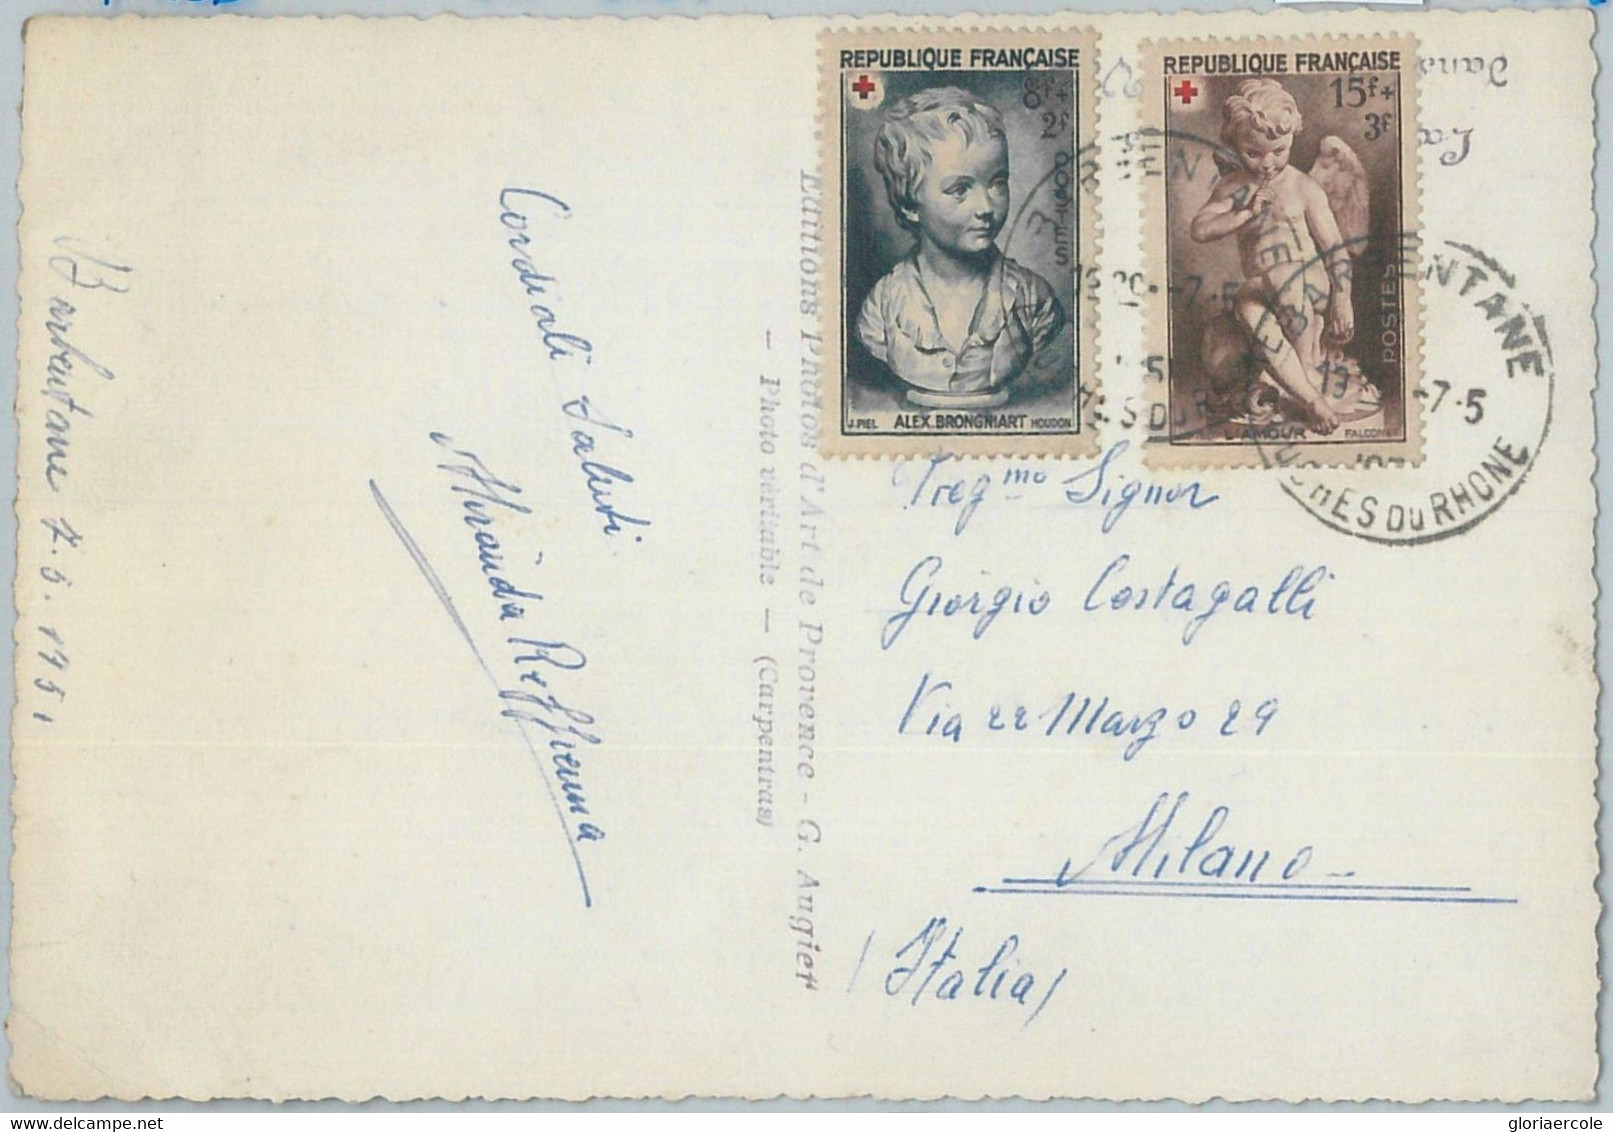 75587 - FRANCE - POSTAL HISTORY - POSTCARD To ITALY - MEDICINE Red Cross  1951 - Croix-Rouge